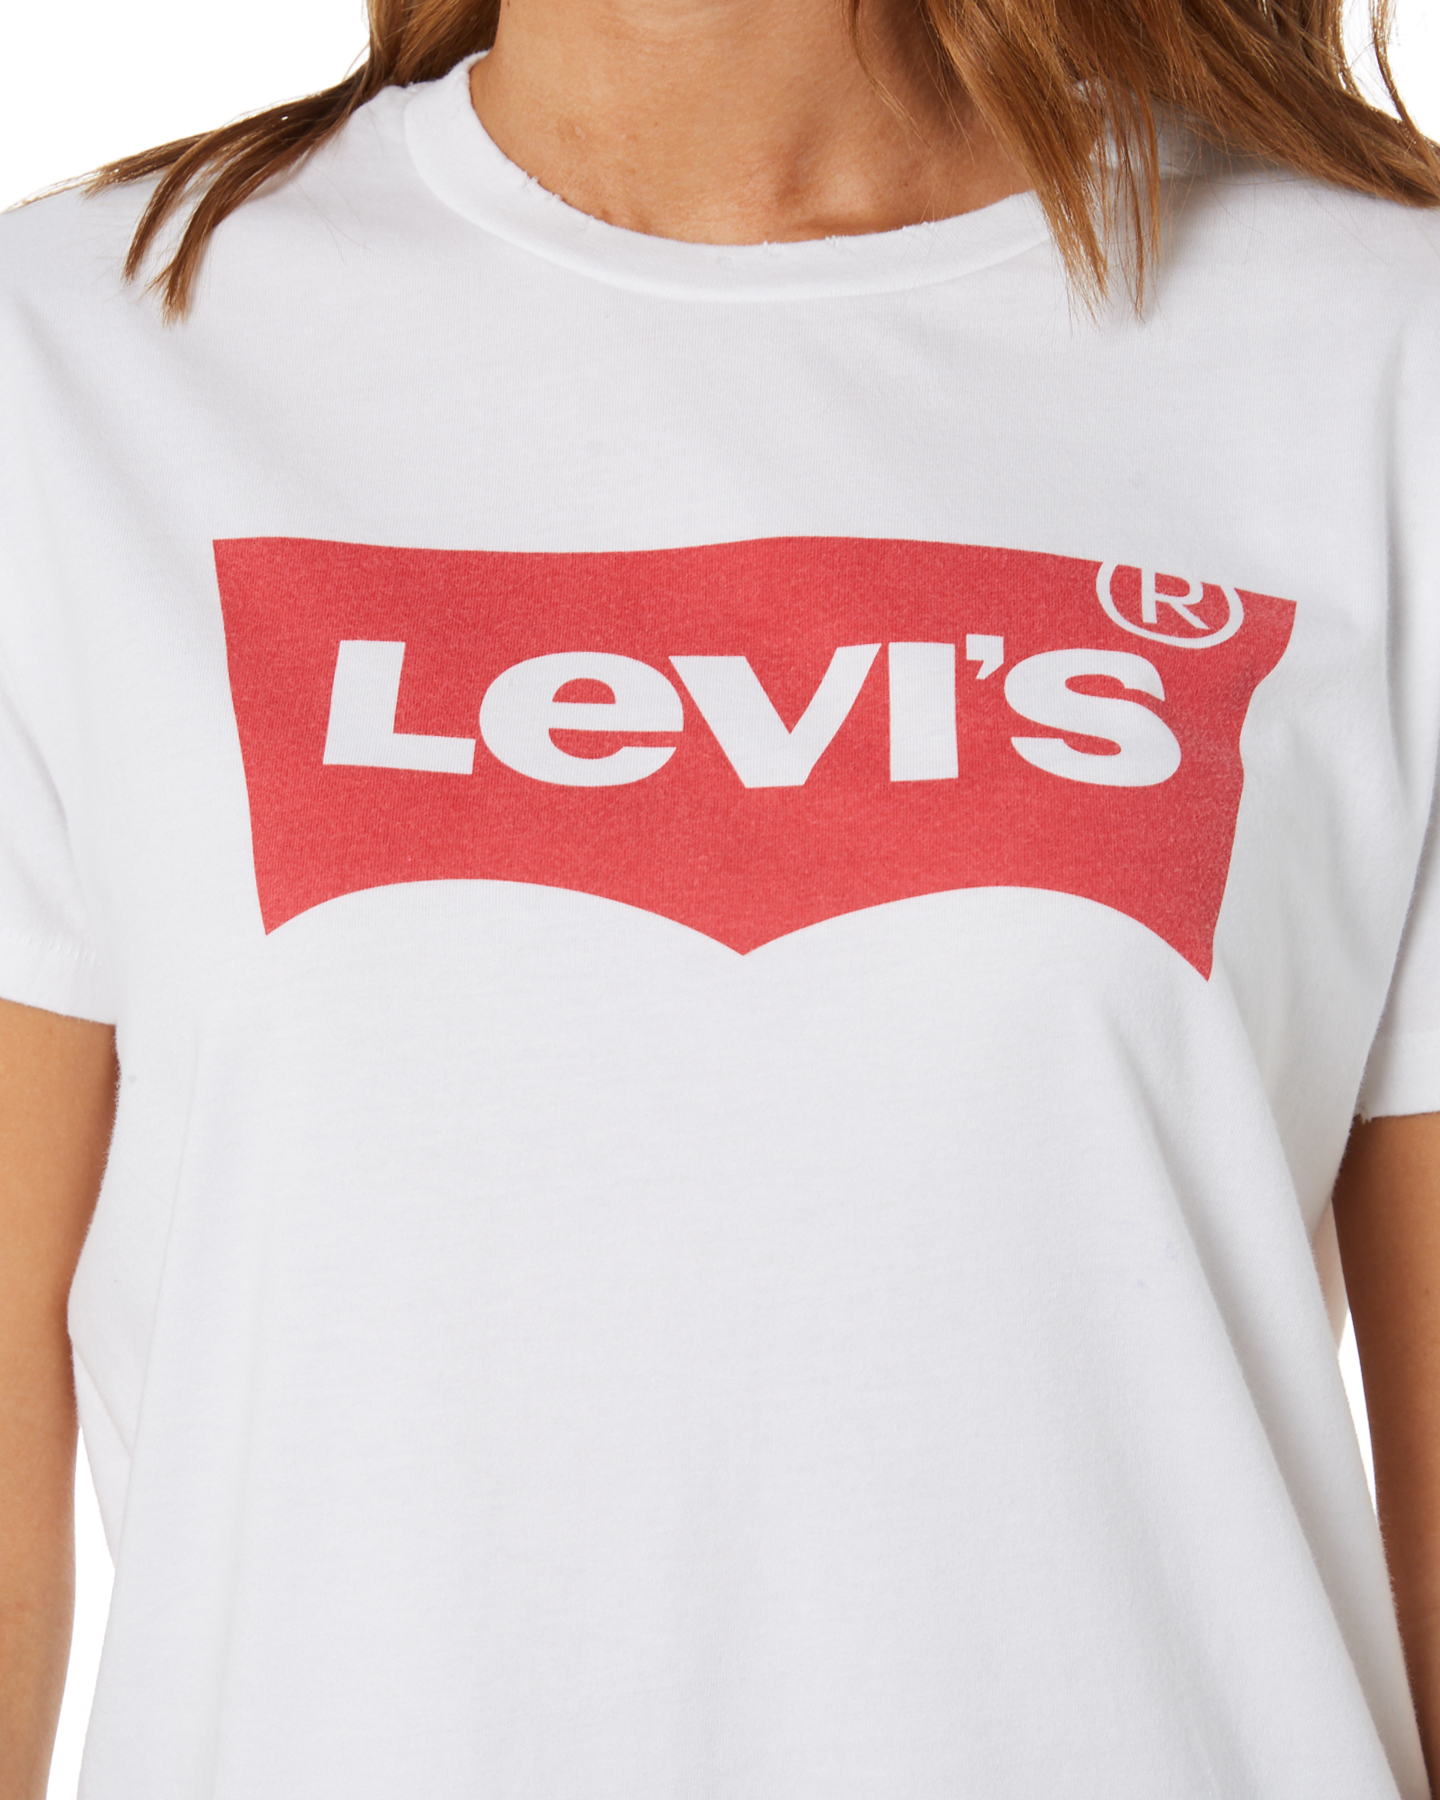 Levi's Vintage Authentic Tee - White | SurfStitch